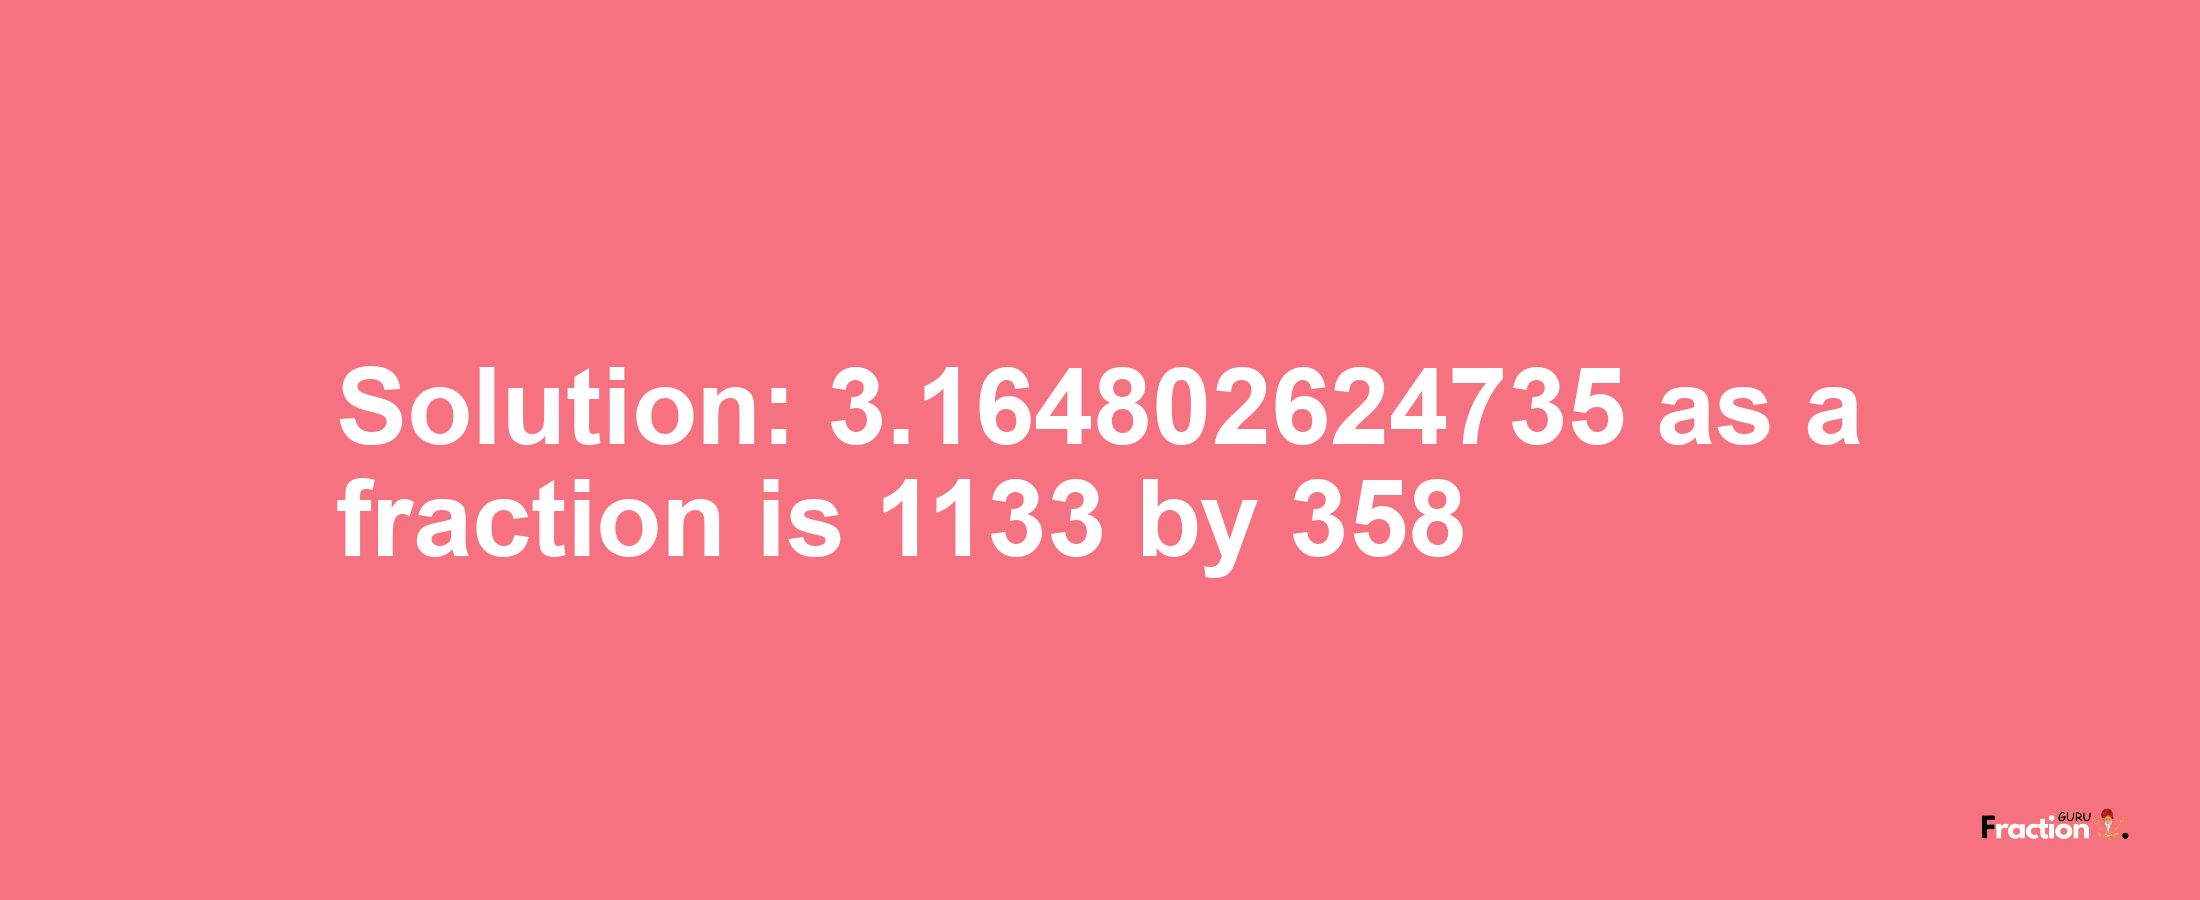 Solution:3.164802624735 as a fraction is 1133/358